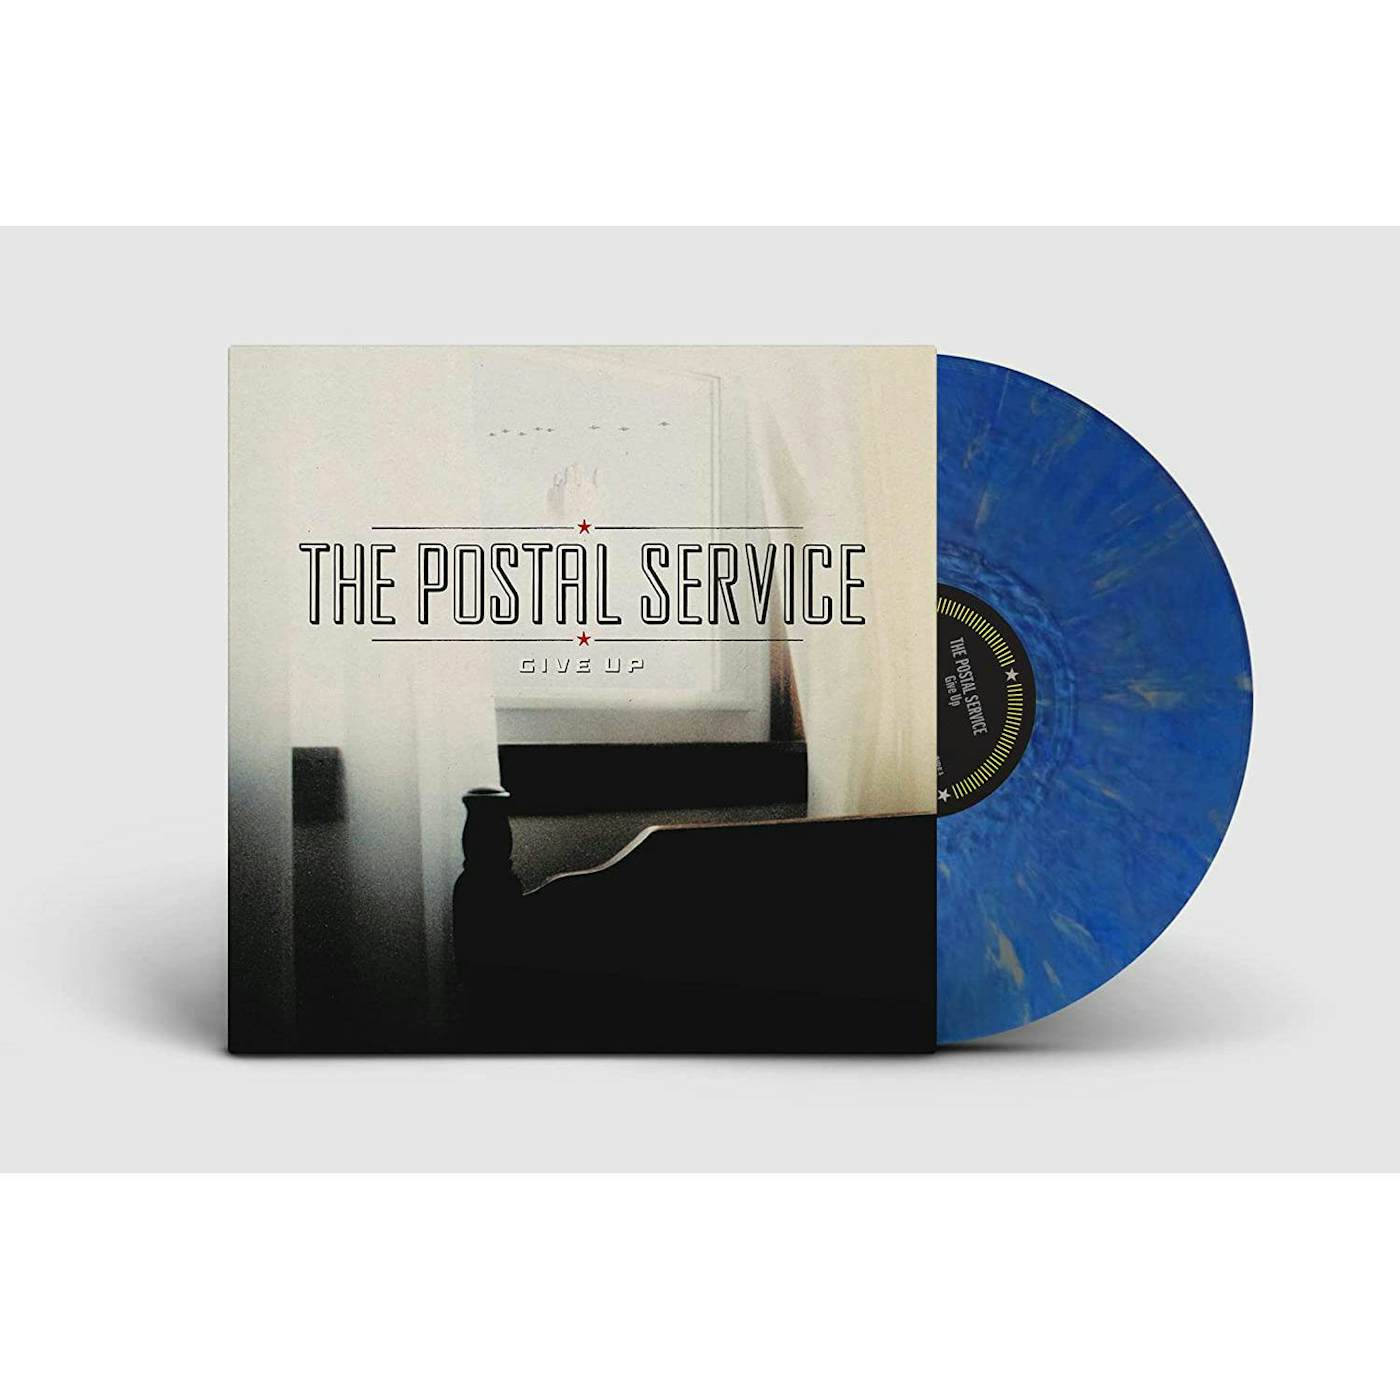 The Postal Service Give Up (Limited Edition, Blue w/ Metallic Silver) Vinyl Record